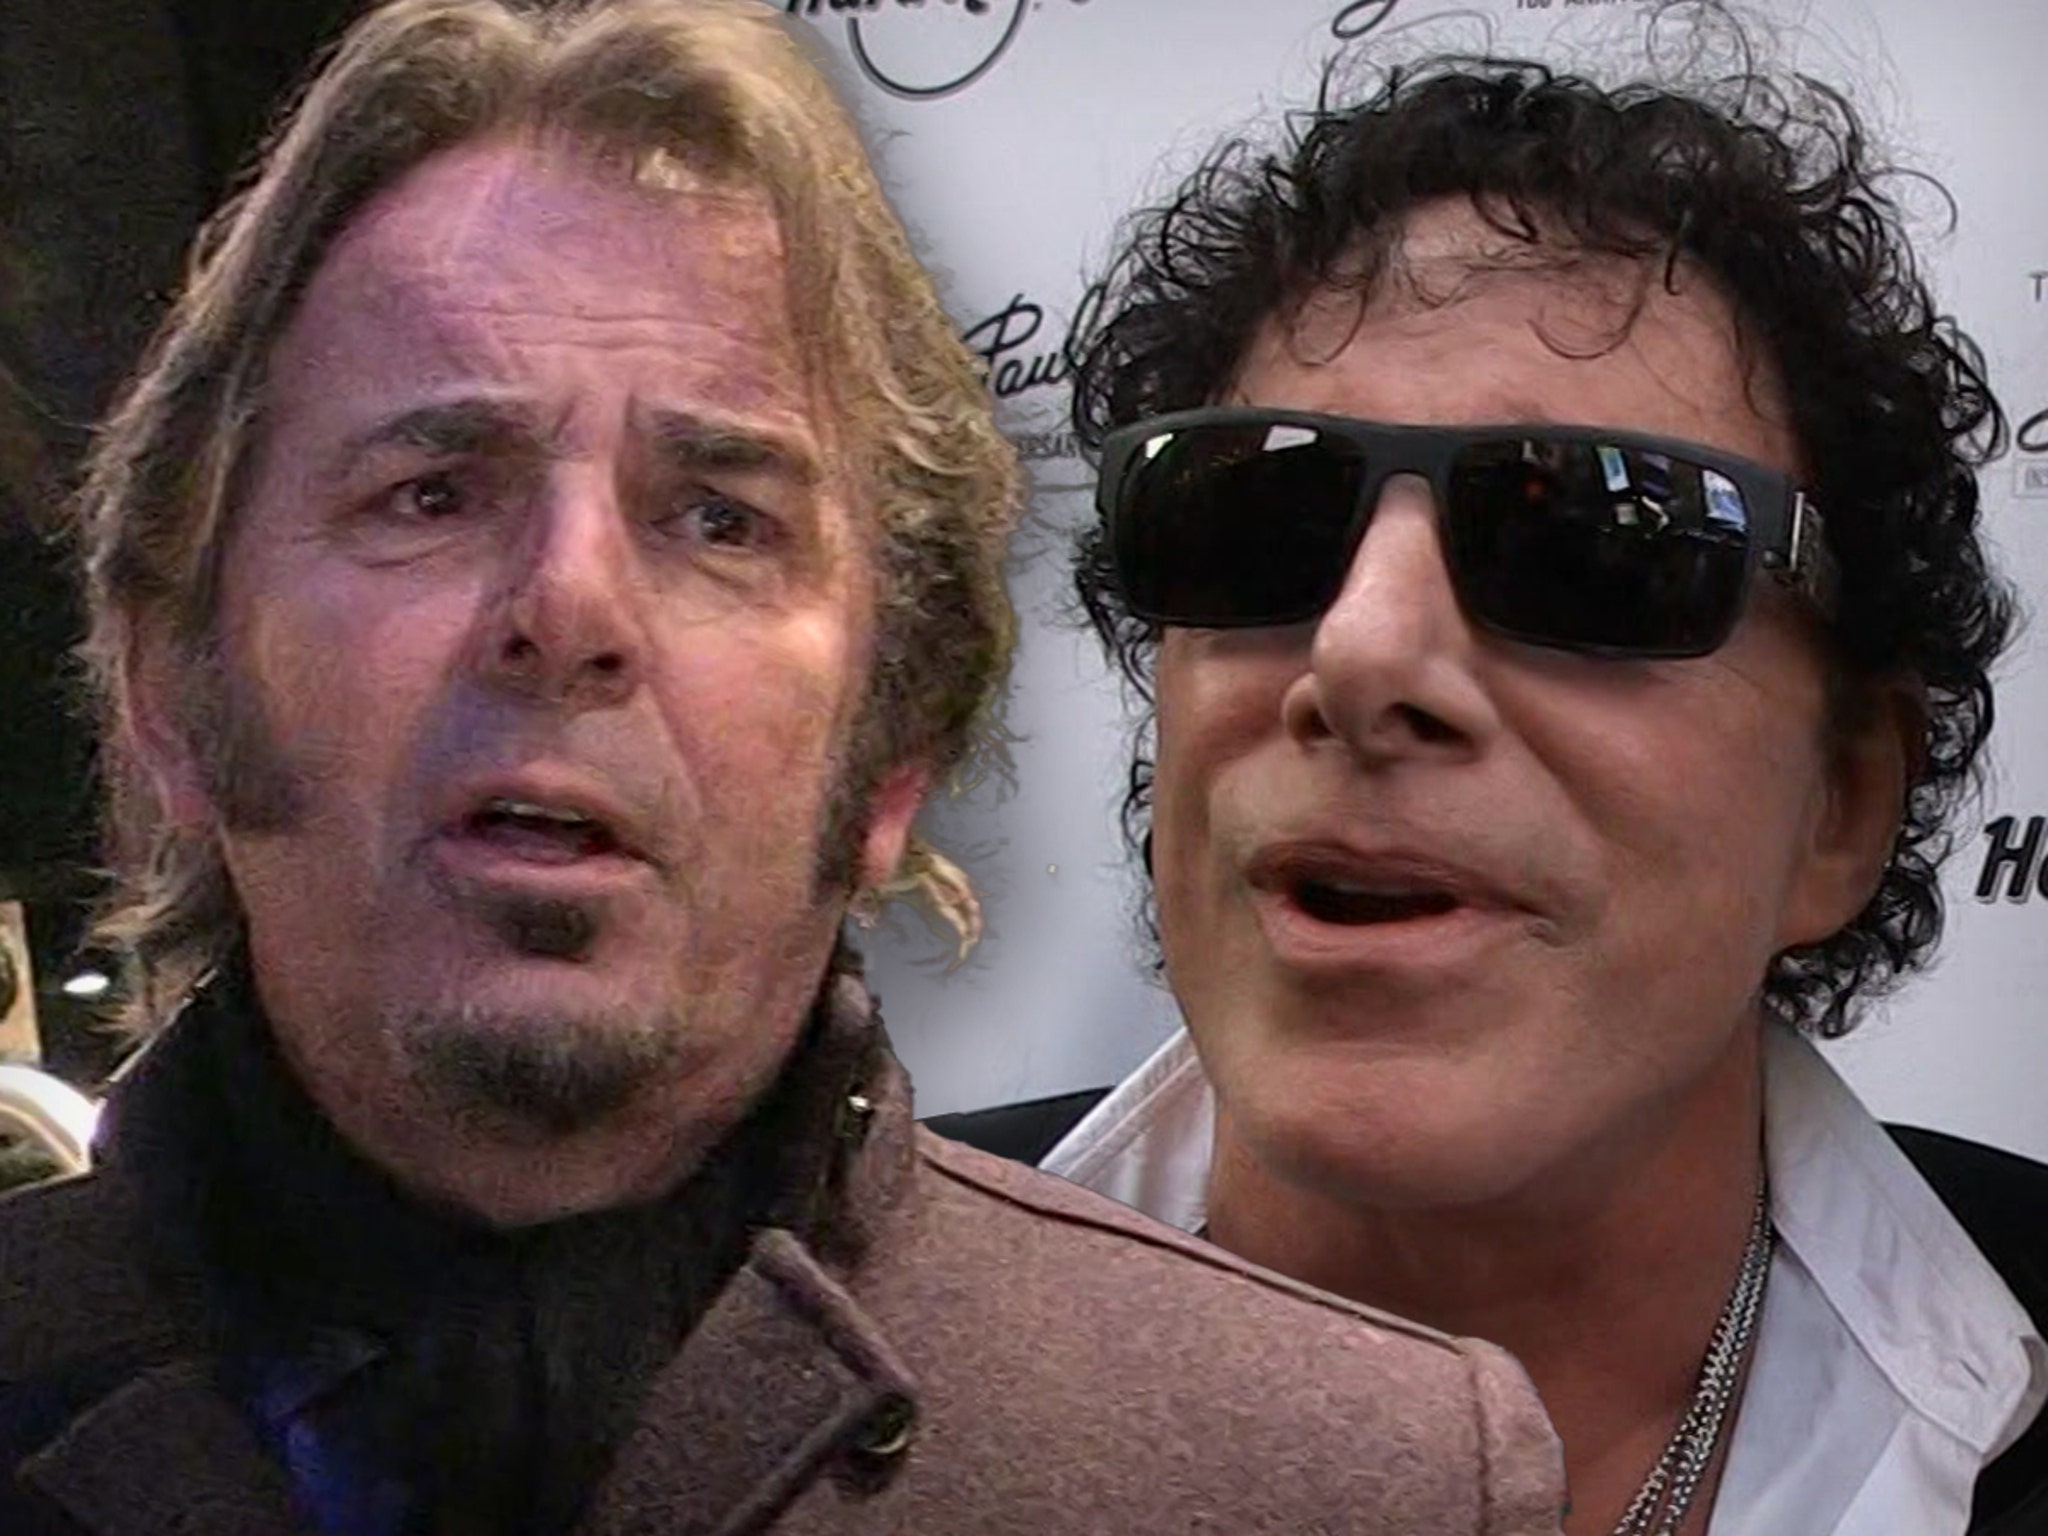 Journey's Jonathan Cain Says Neal Schon Lost AMEX Access Over Reckless Spending - TMZ (Picture 1)